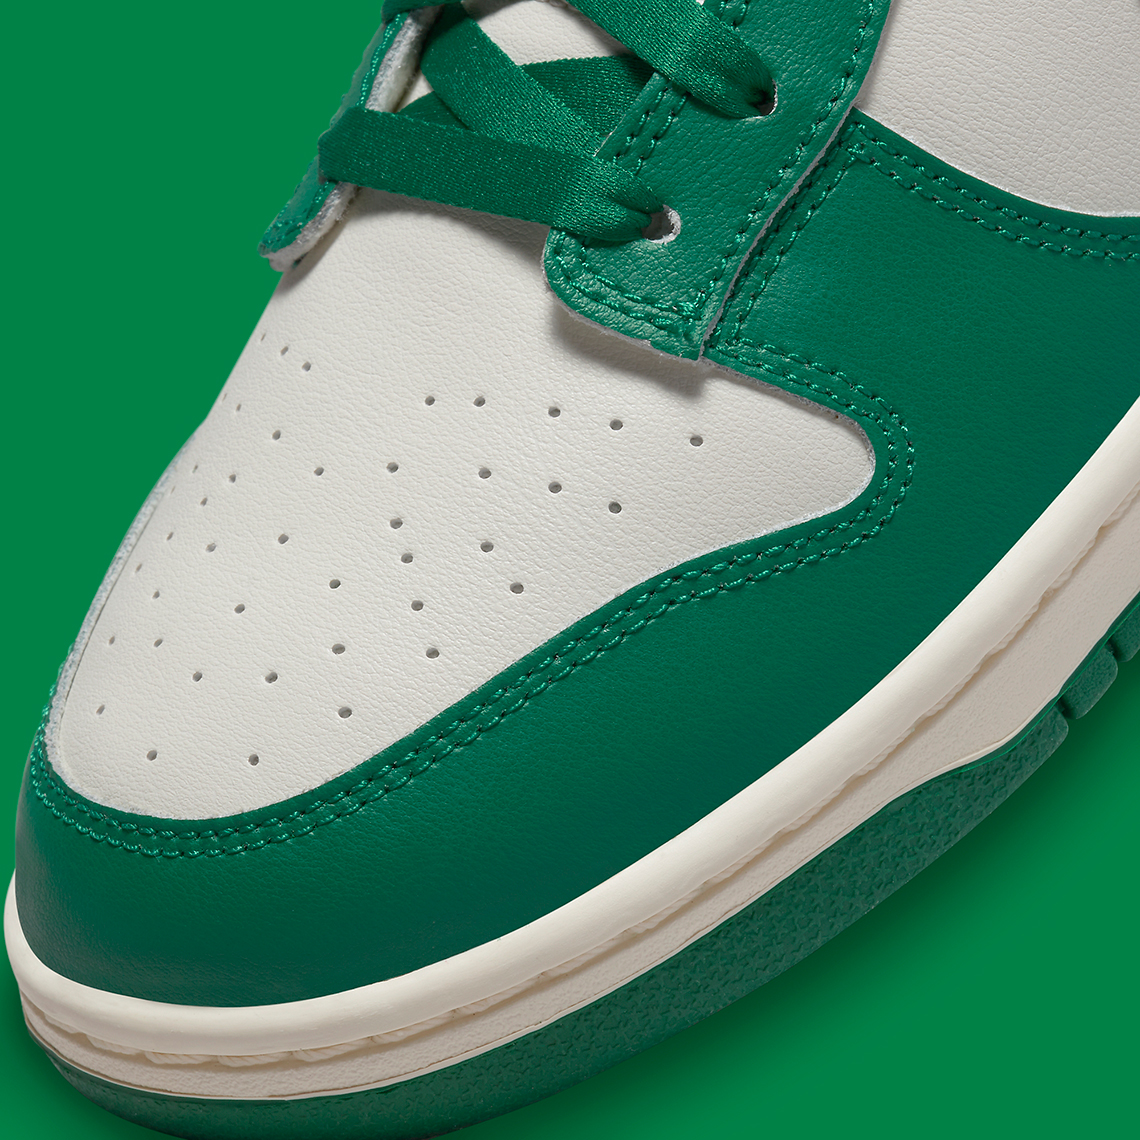 Nike Dunk Low Lottery Green Dr9654 100 Release Date 1